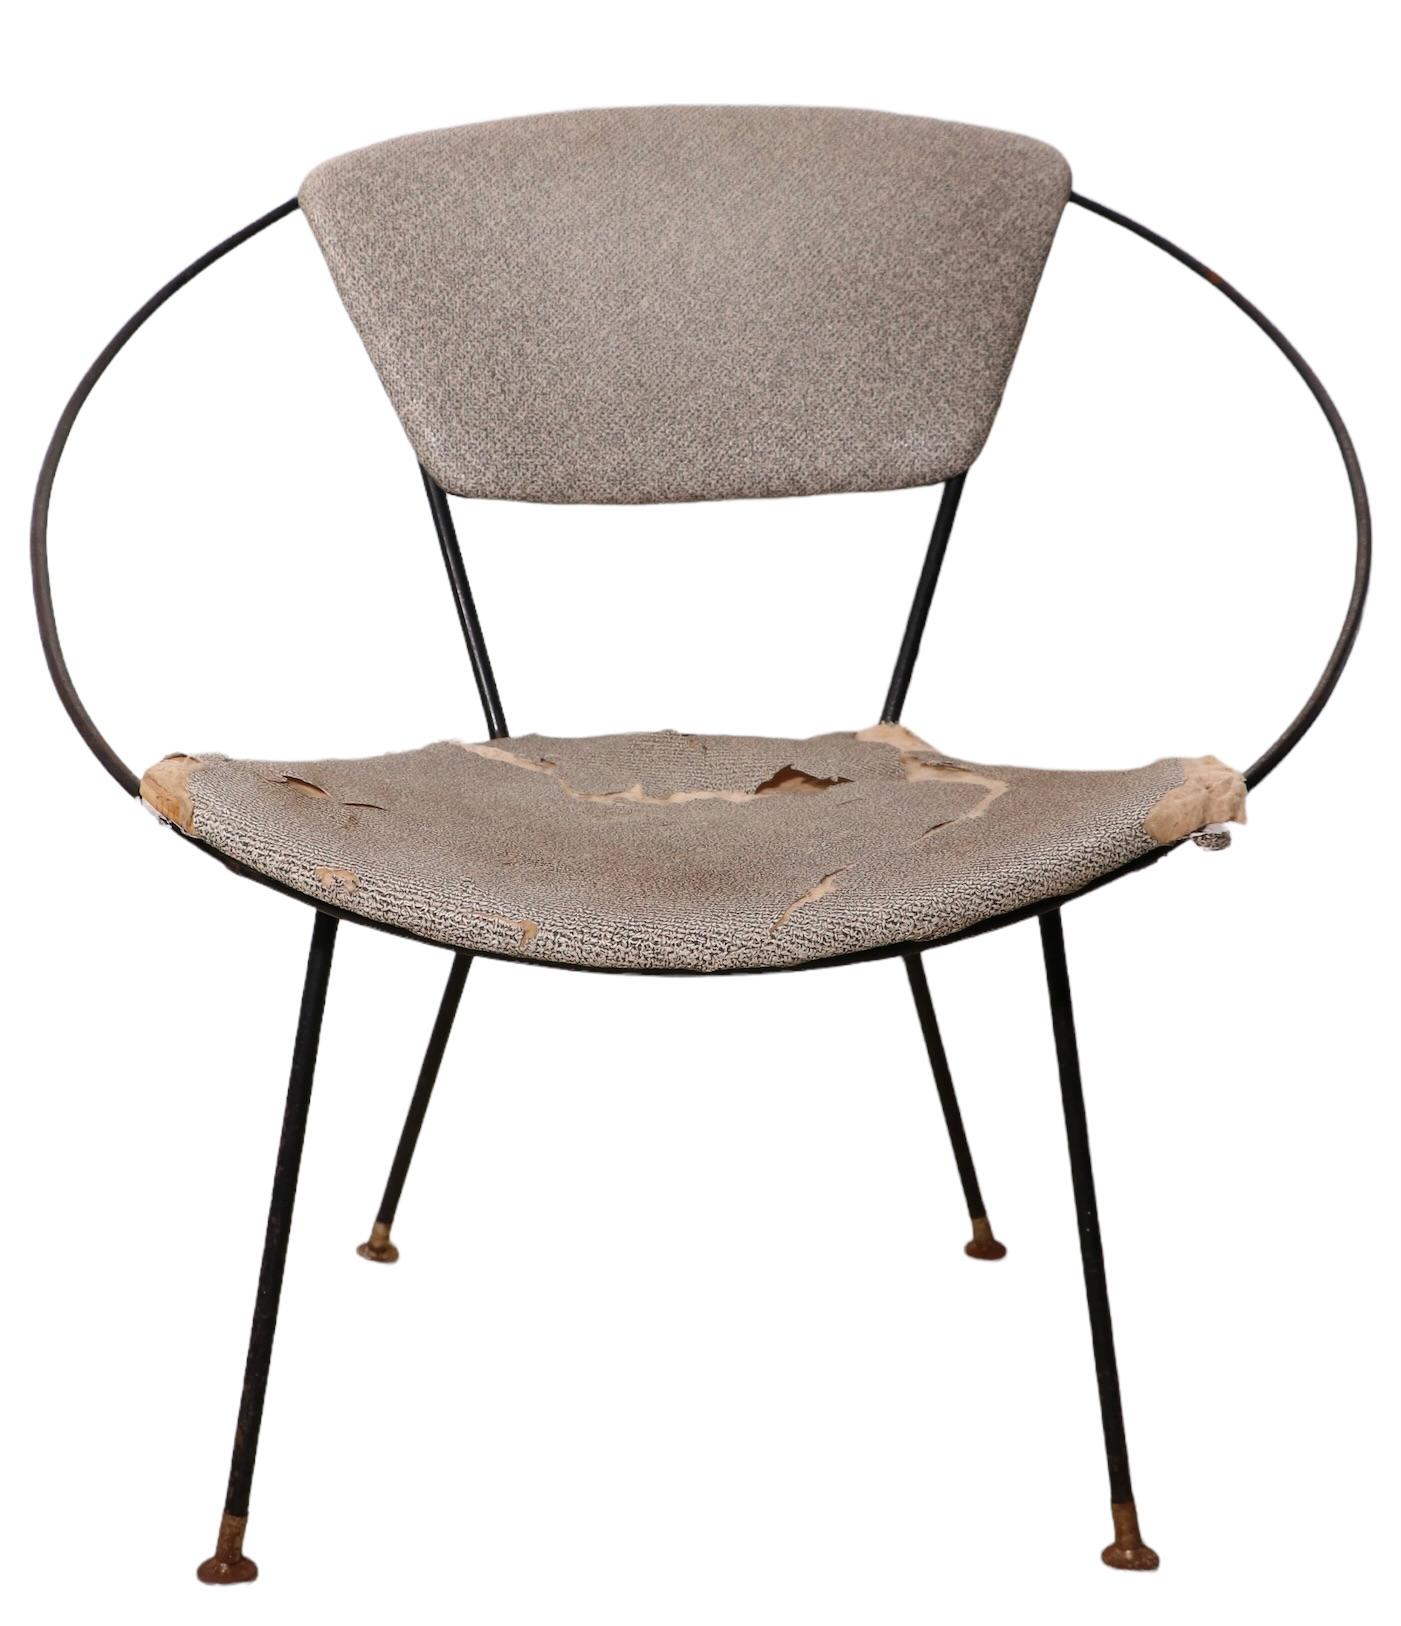 Pr. Wrought Iron Mid Century Hoop Chairs by John Cicchelli for Riley Wolff 1950s For Sale 2